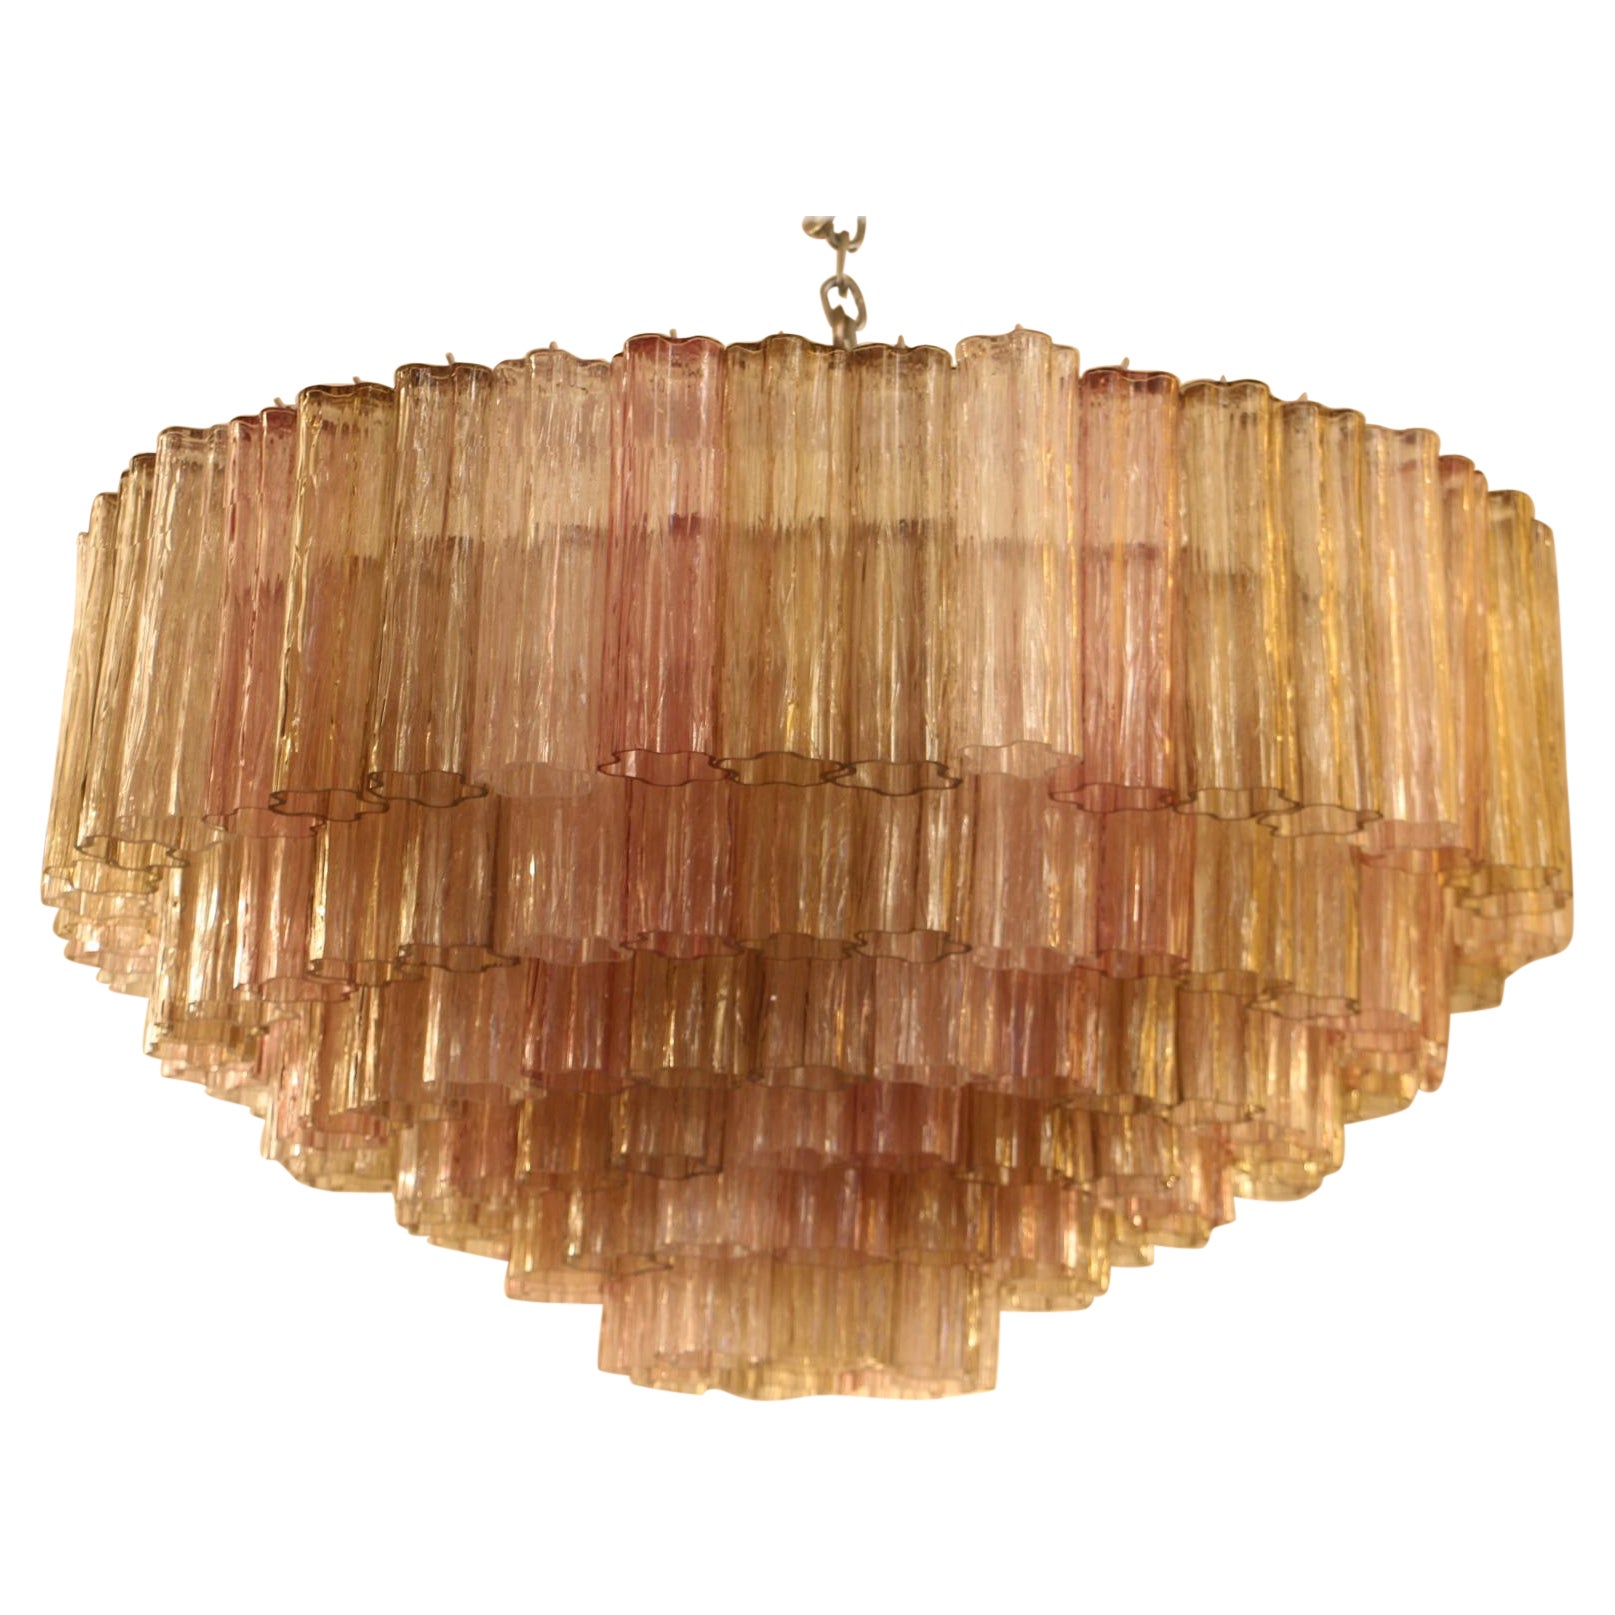 Pink, White and Amber Color Venini Style Tronchi Round Chandelier, Murano Glass For Sale